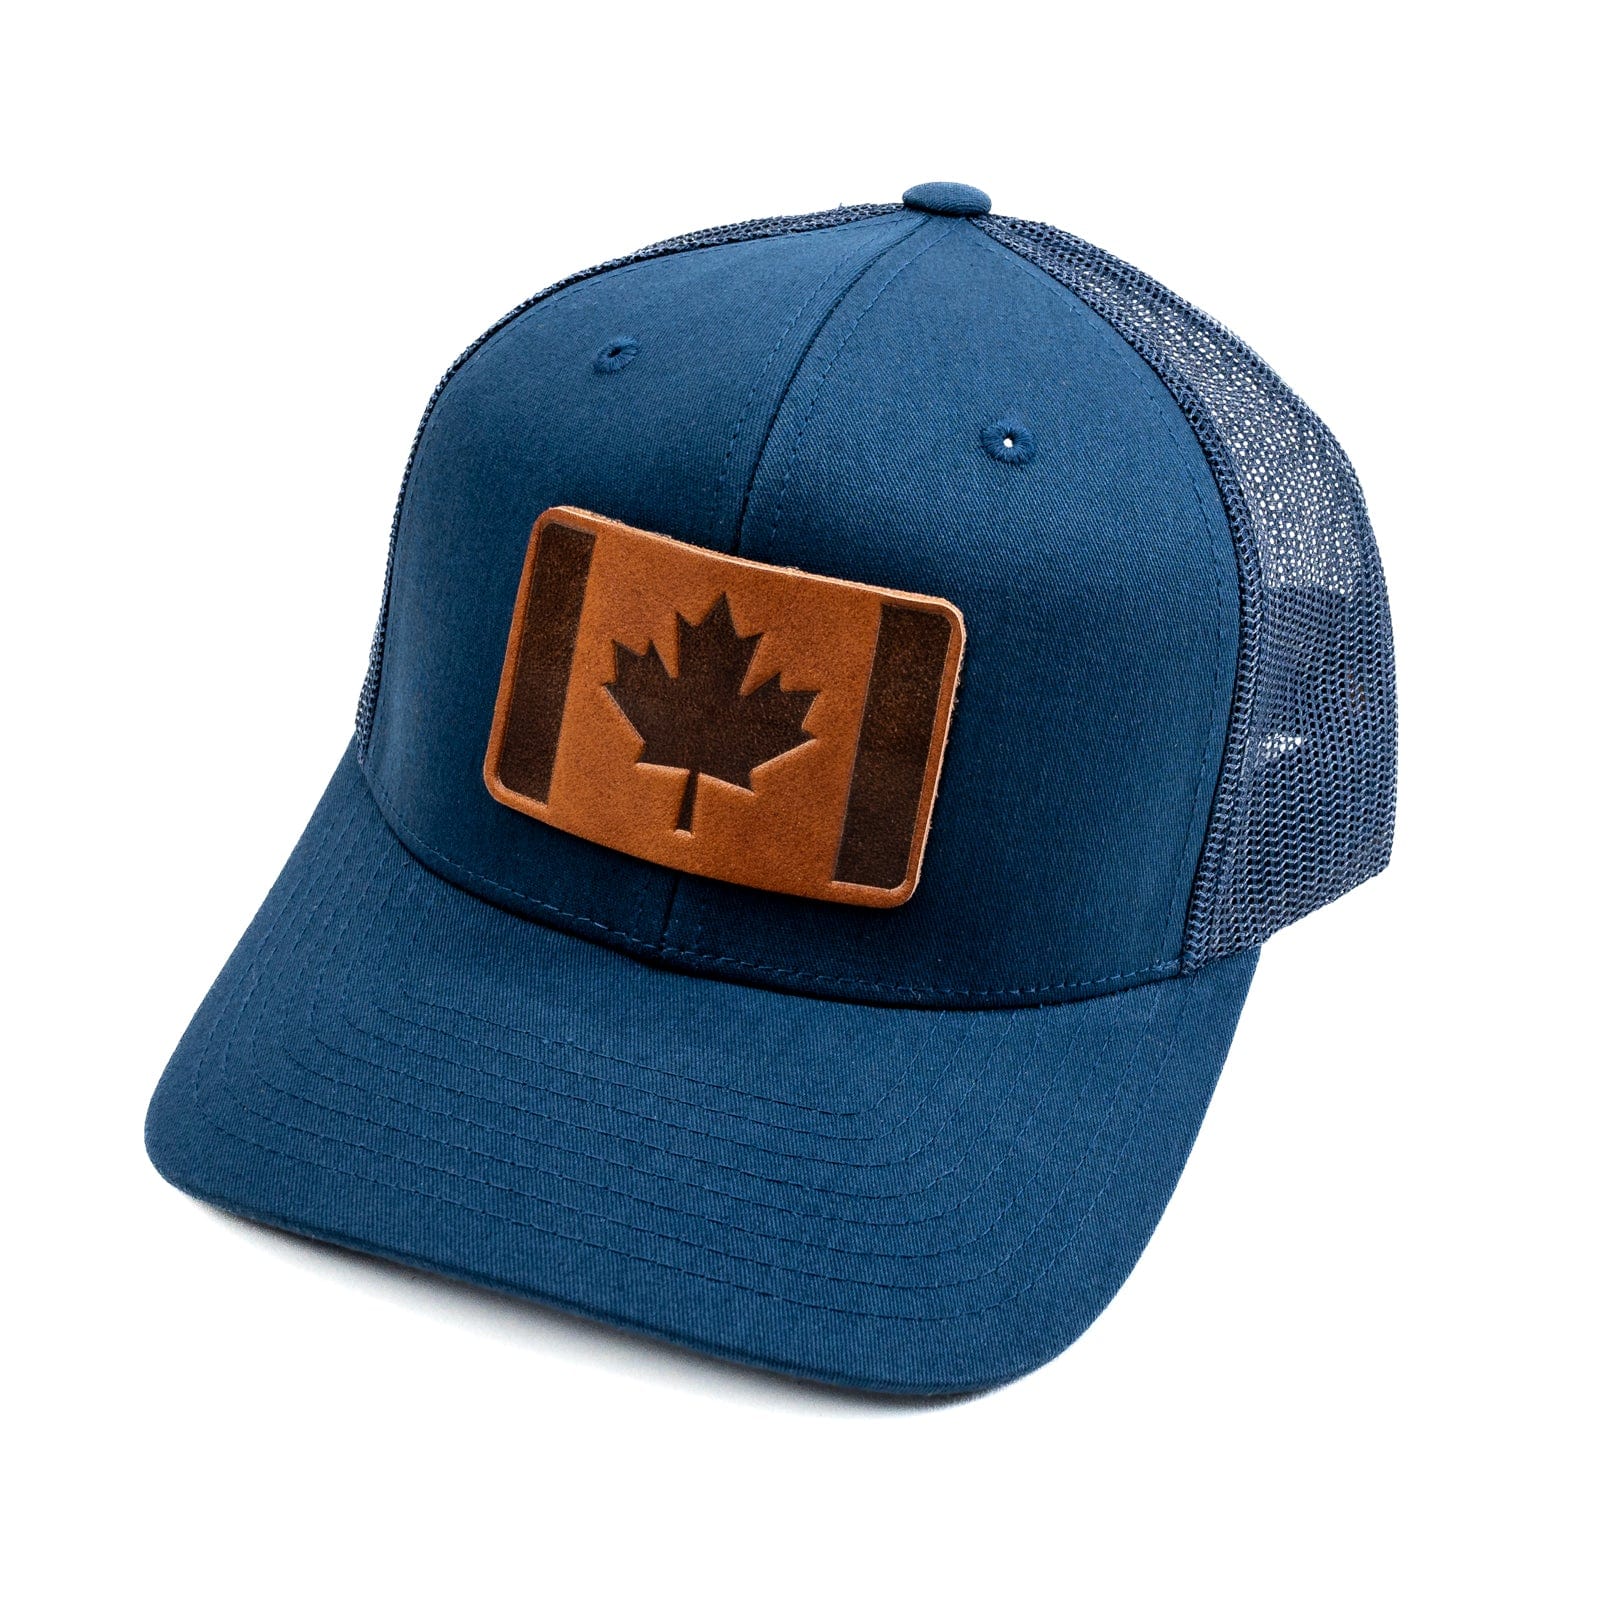 Trucker Hat Canada Flag | Baseball Cap, Snapback Cap with Leather Patch | Popov Leather, Ocean